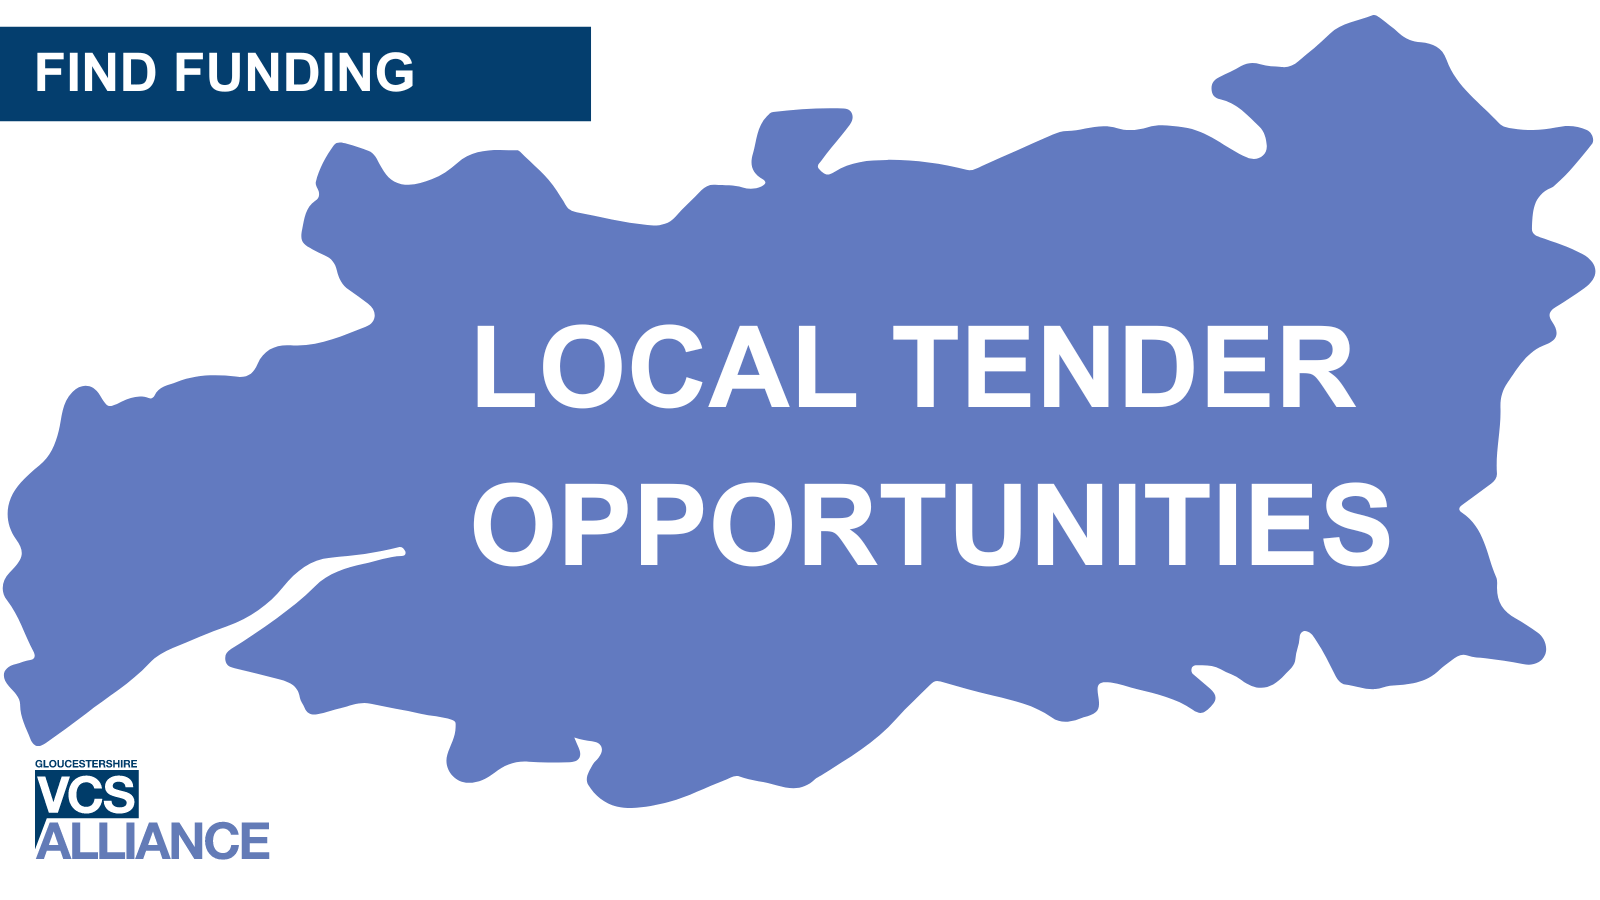 Words: 'Find Funding. Local Tender Opportunities' with outline map of the county of Gloucestershire in the background